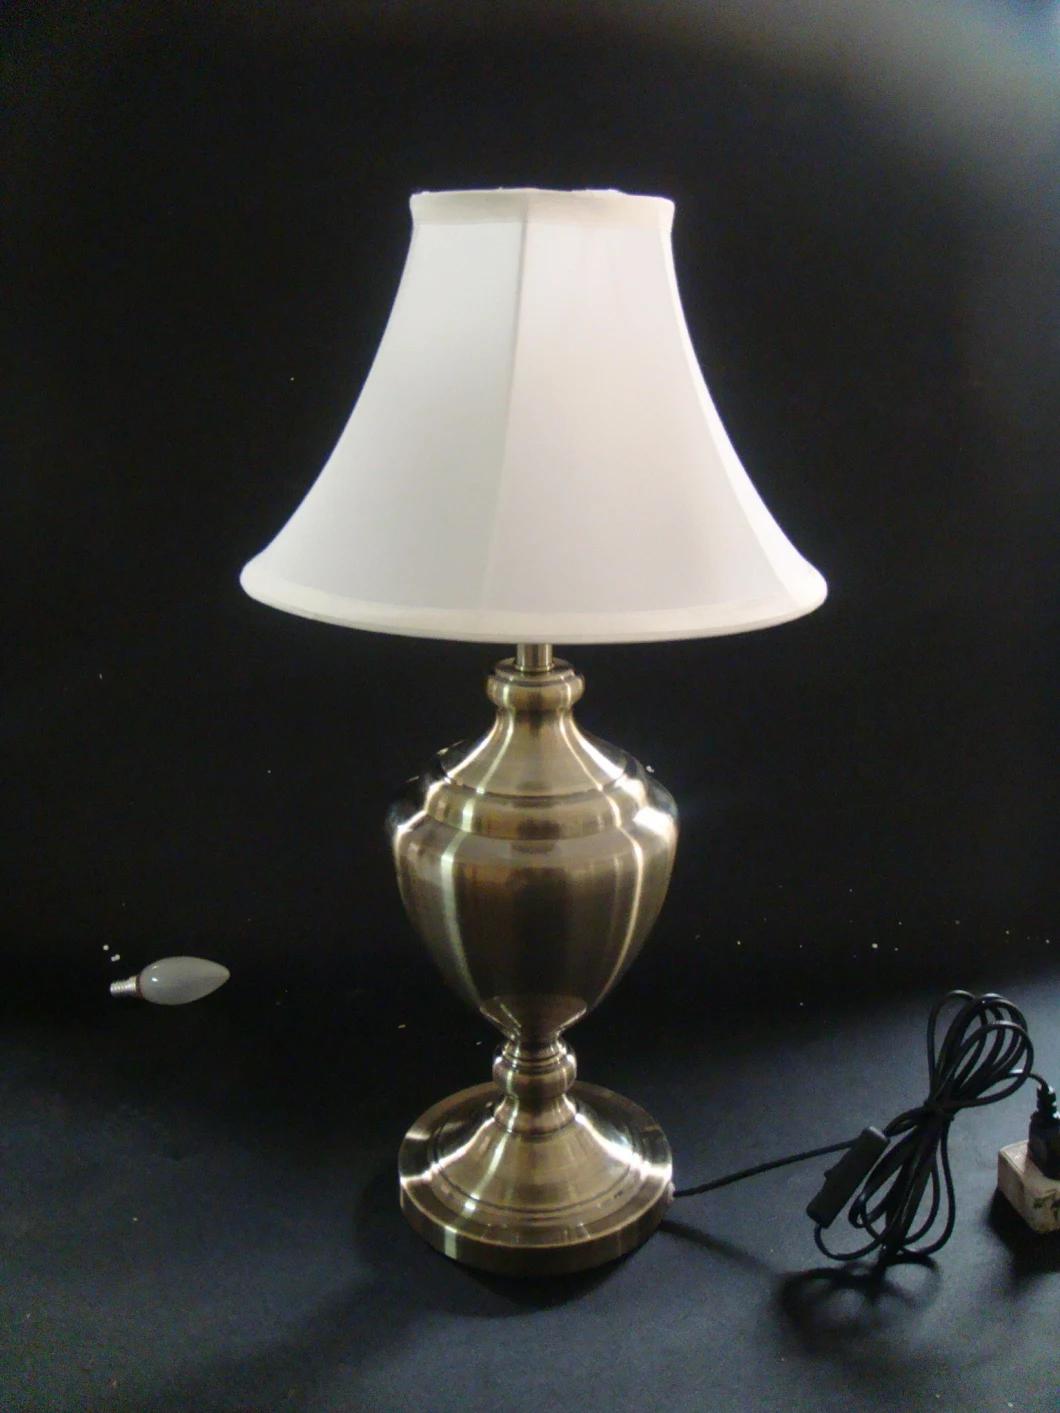 Satin Nickel Metal Body and White Fabric Shade Table Lamp.